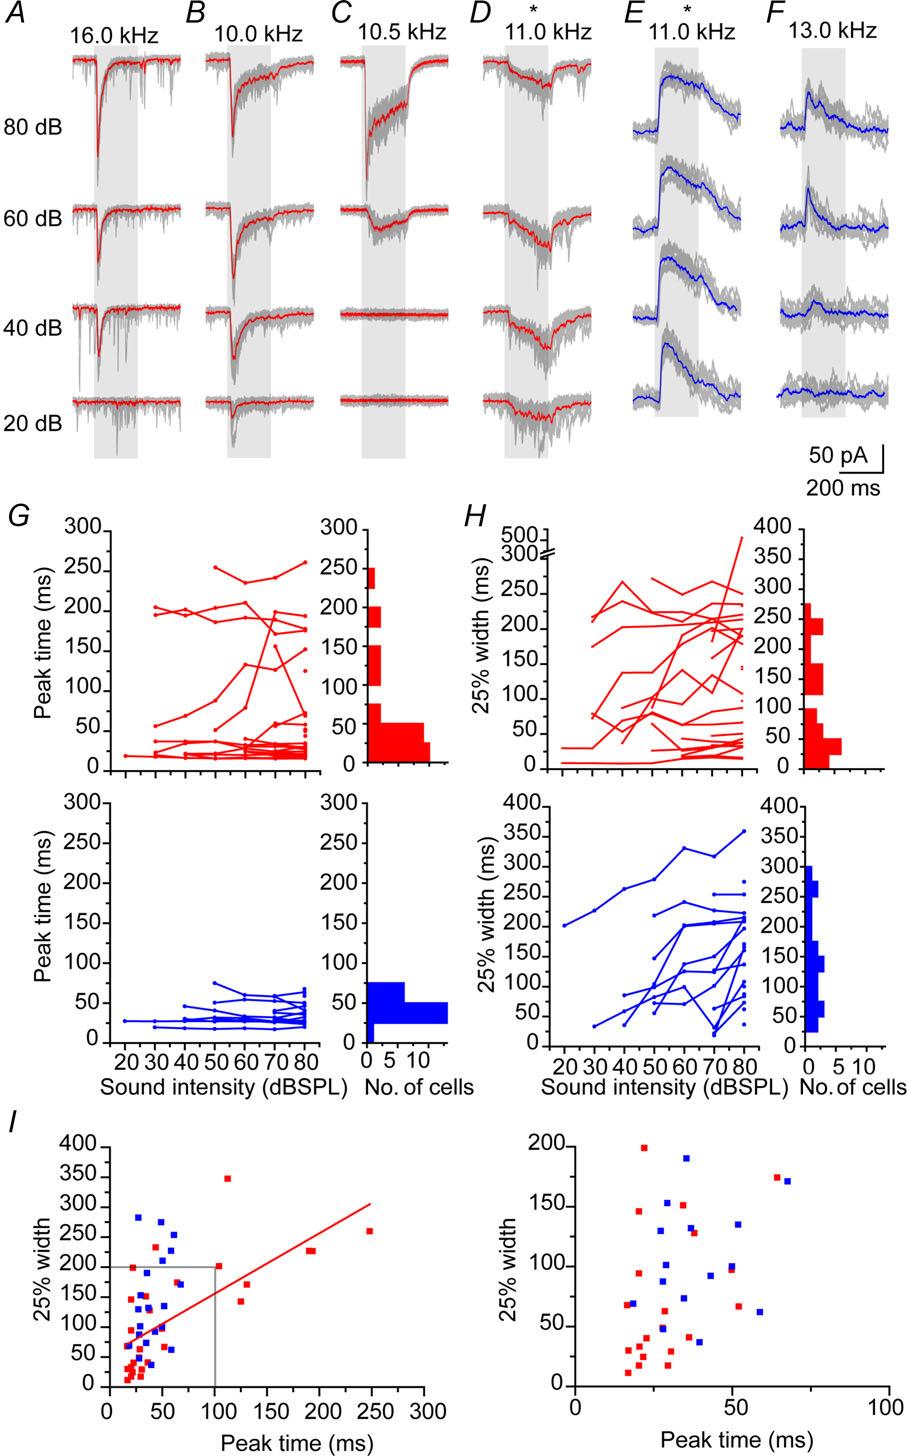 J Physiol 592.16 Asymmetric synaptic temporal interactions 3655 early-peaking transient seepscs (Fig. 2A)toearly-peaking sustained seepscs with longer latency peak times and durations (Fig. 2B, C).